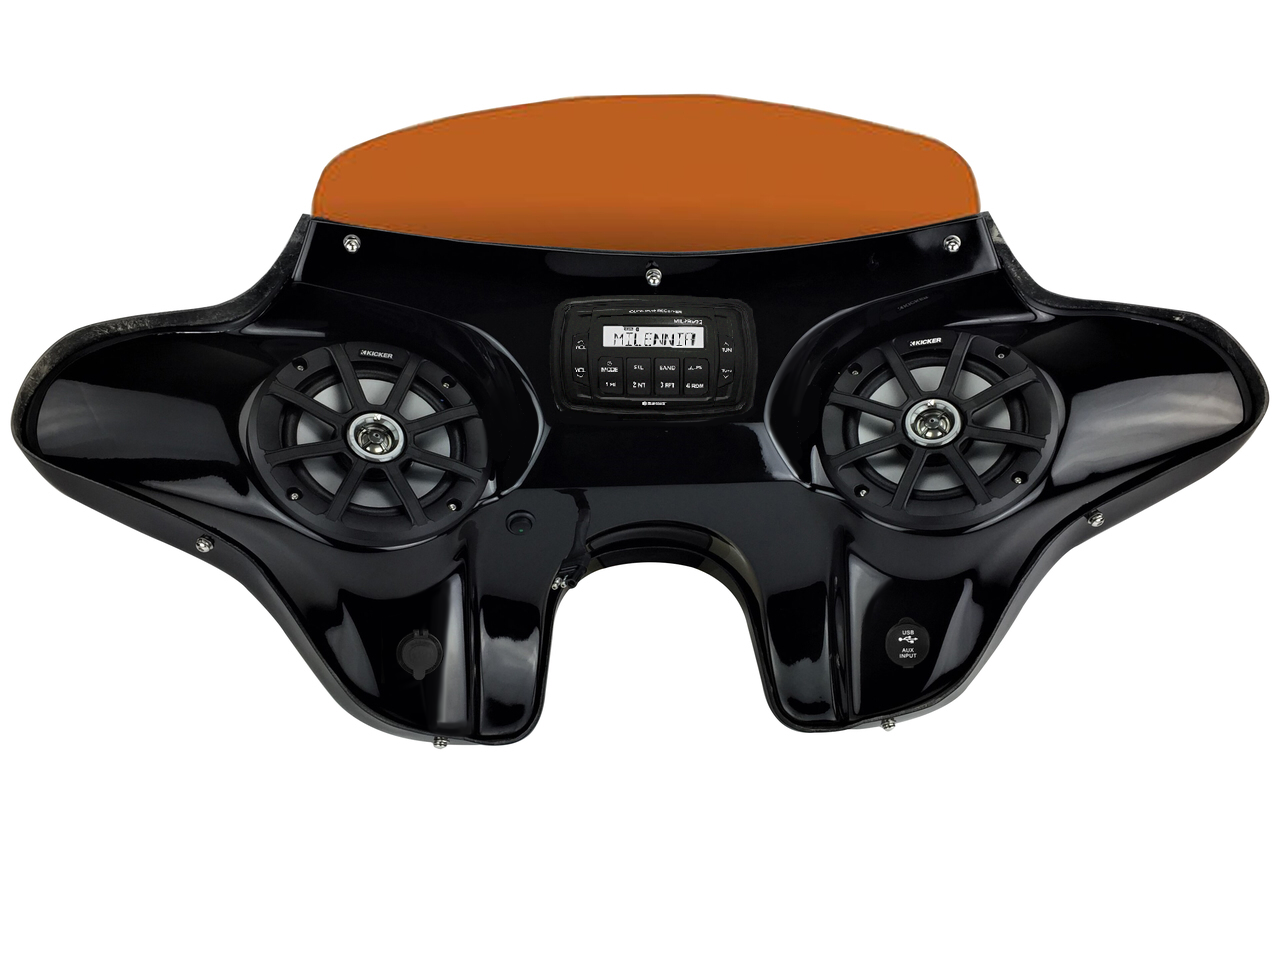 Sportster Batwing Fairing with Speakers and Stereo System